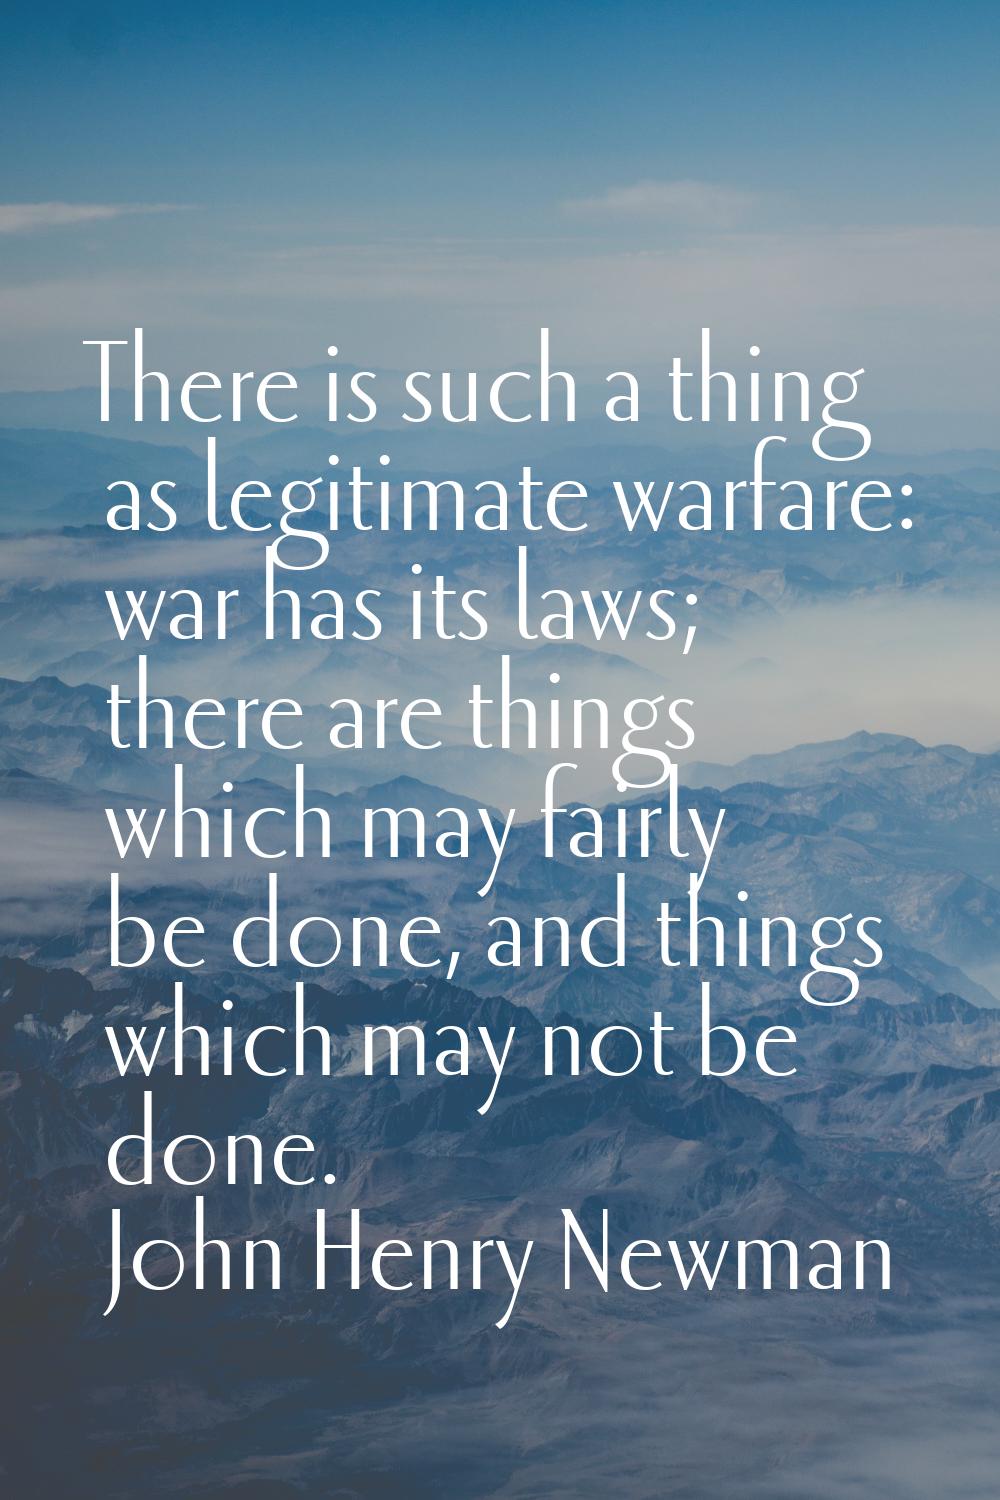 There is such a thing as legitimate warfare: war has its laws; there are things which may fairly be